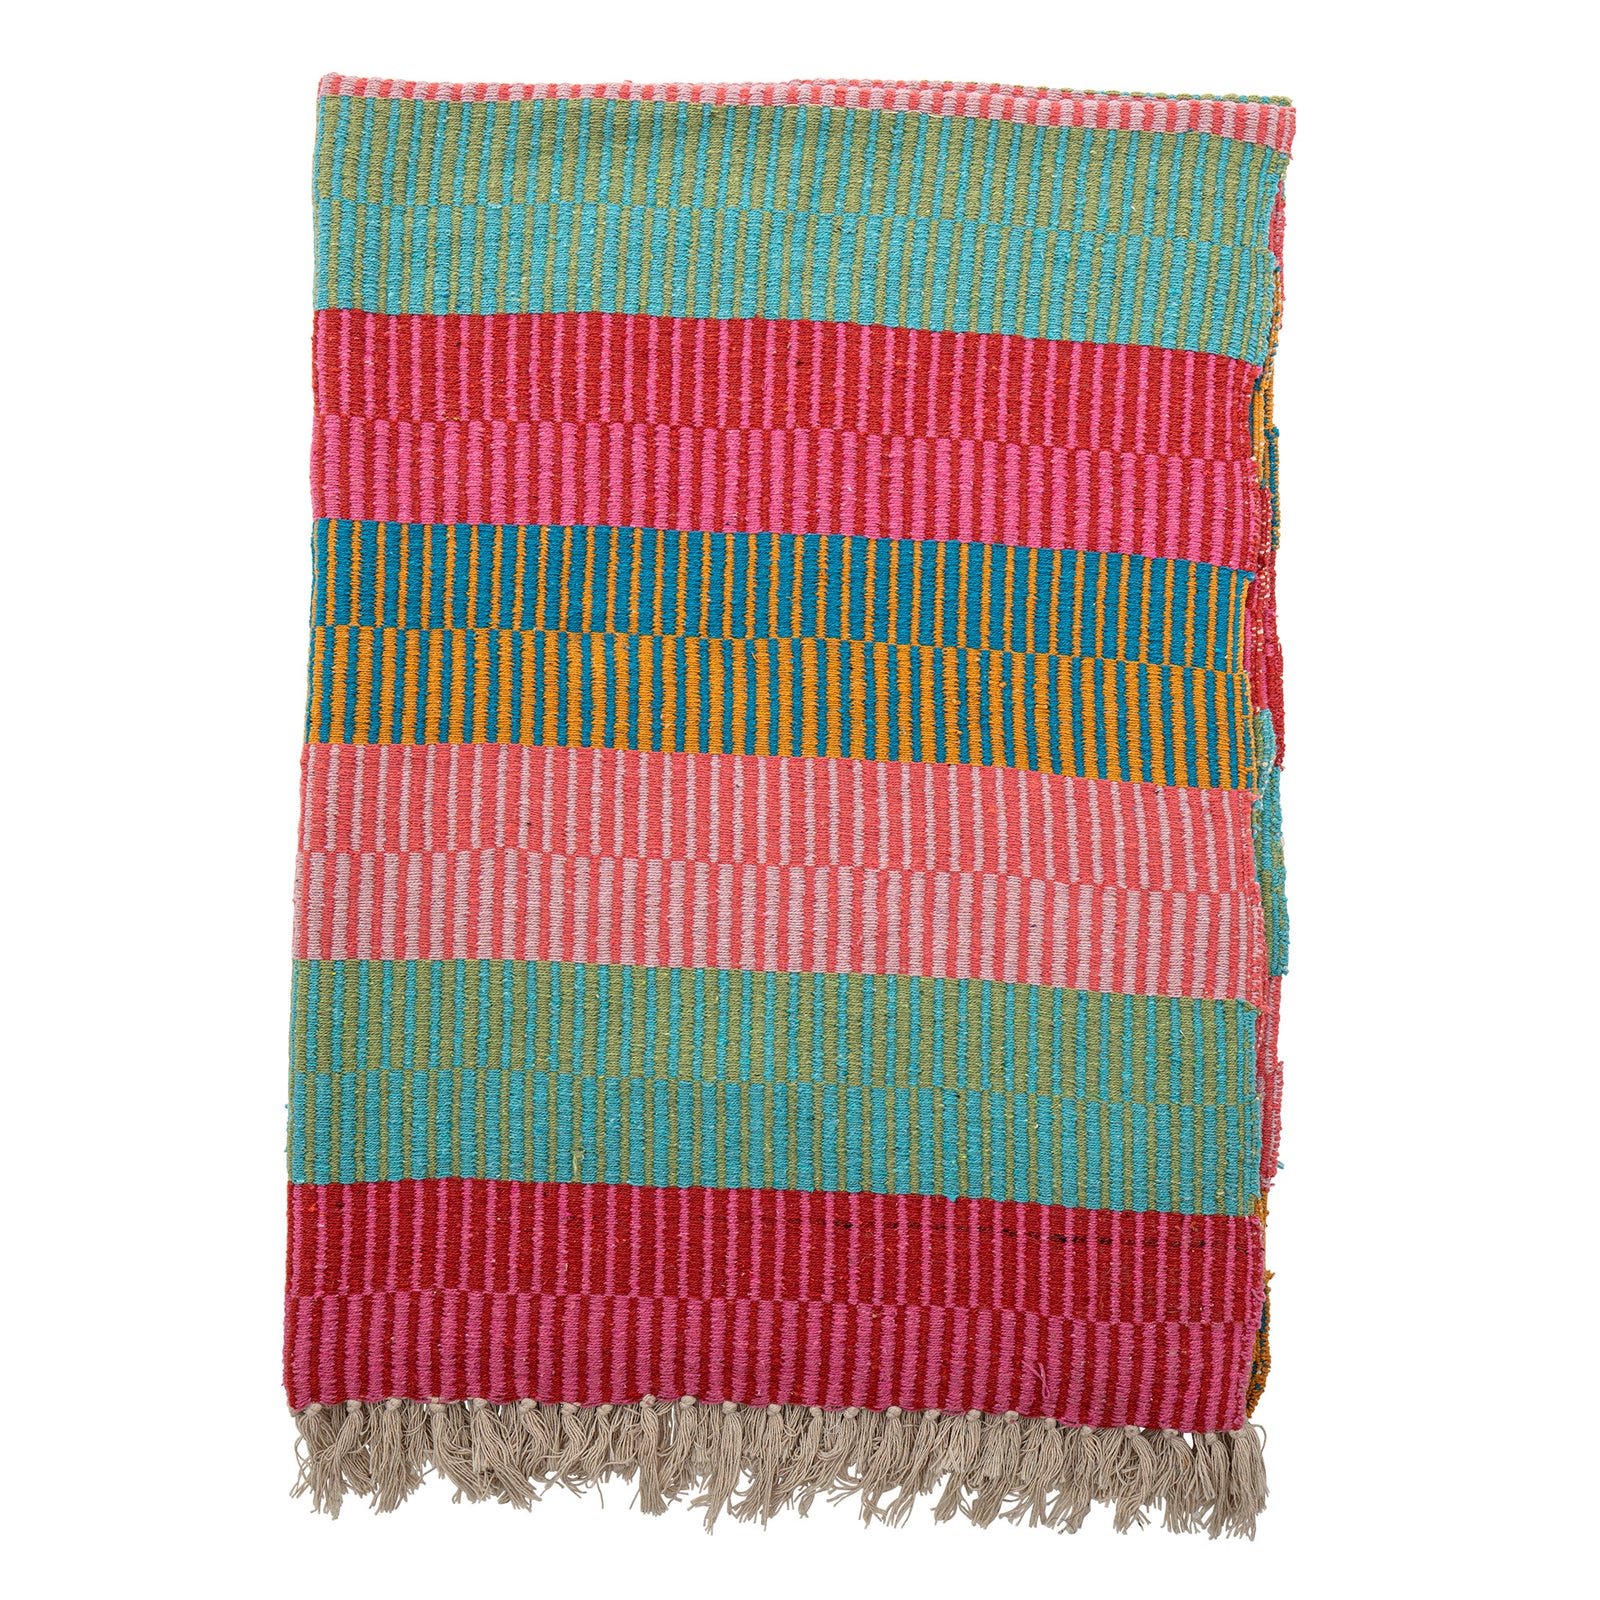 Isnel Throw, Green, Recycled Cotton